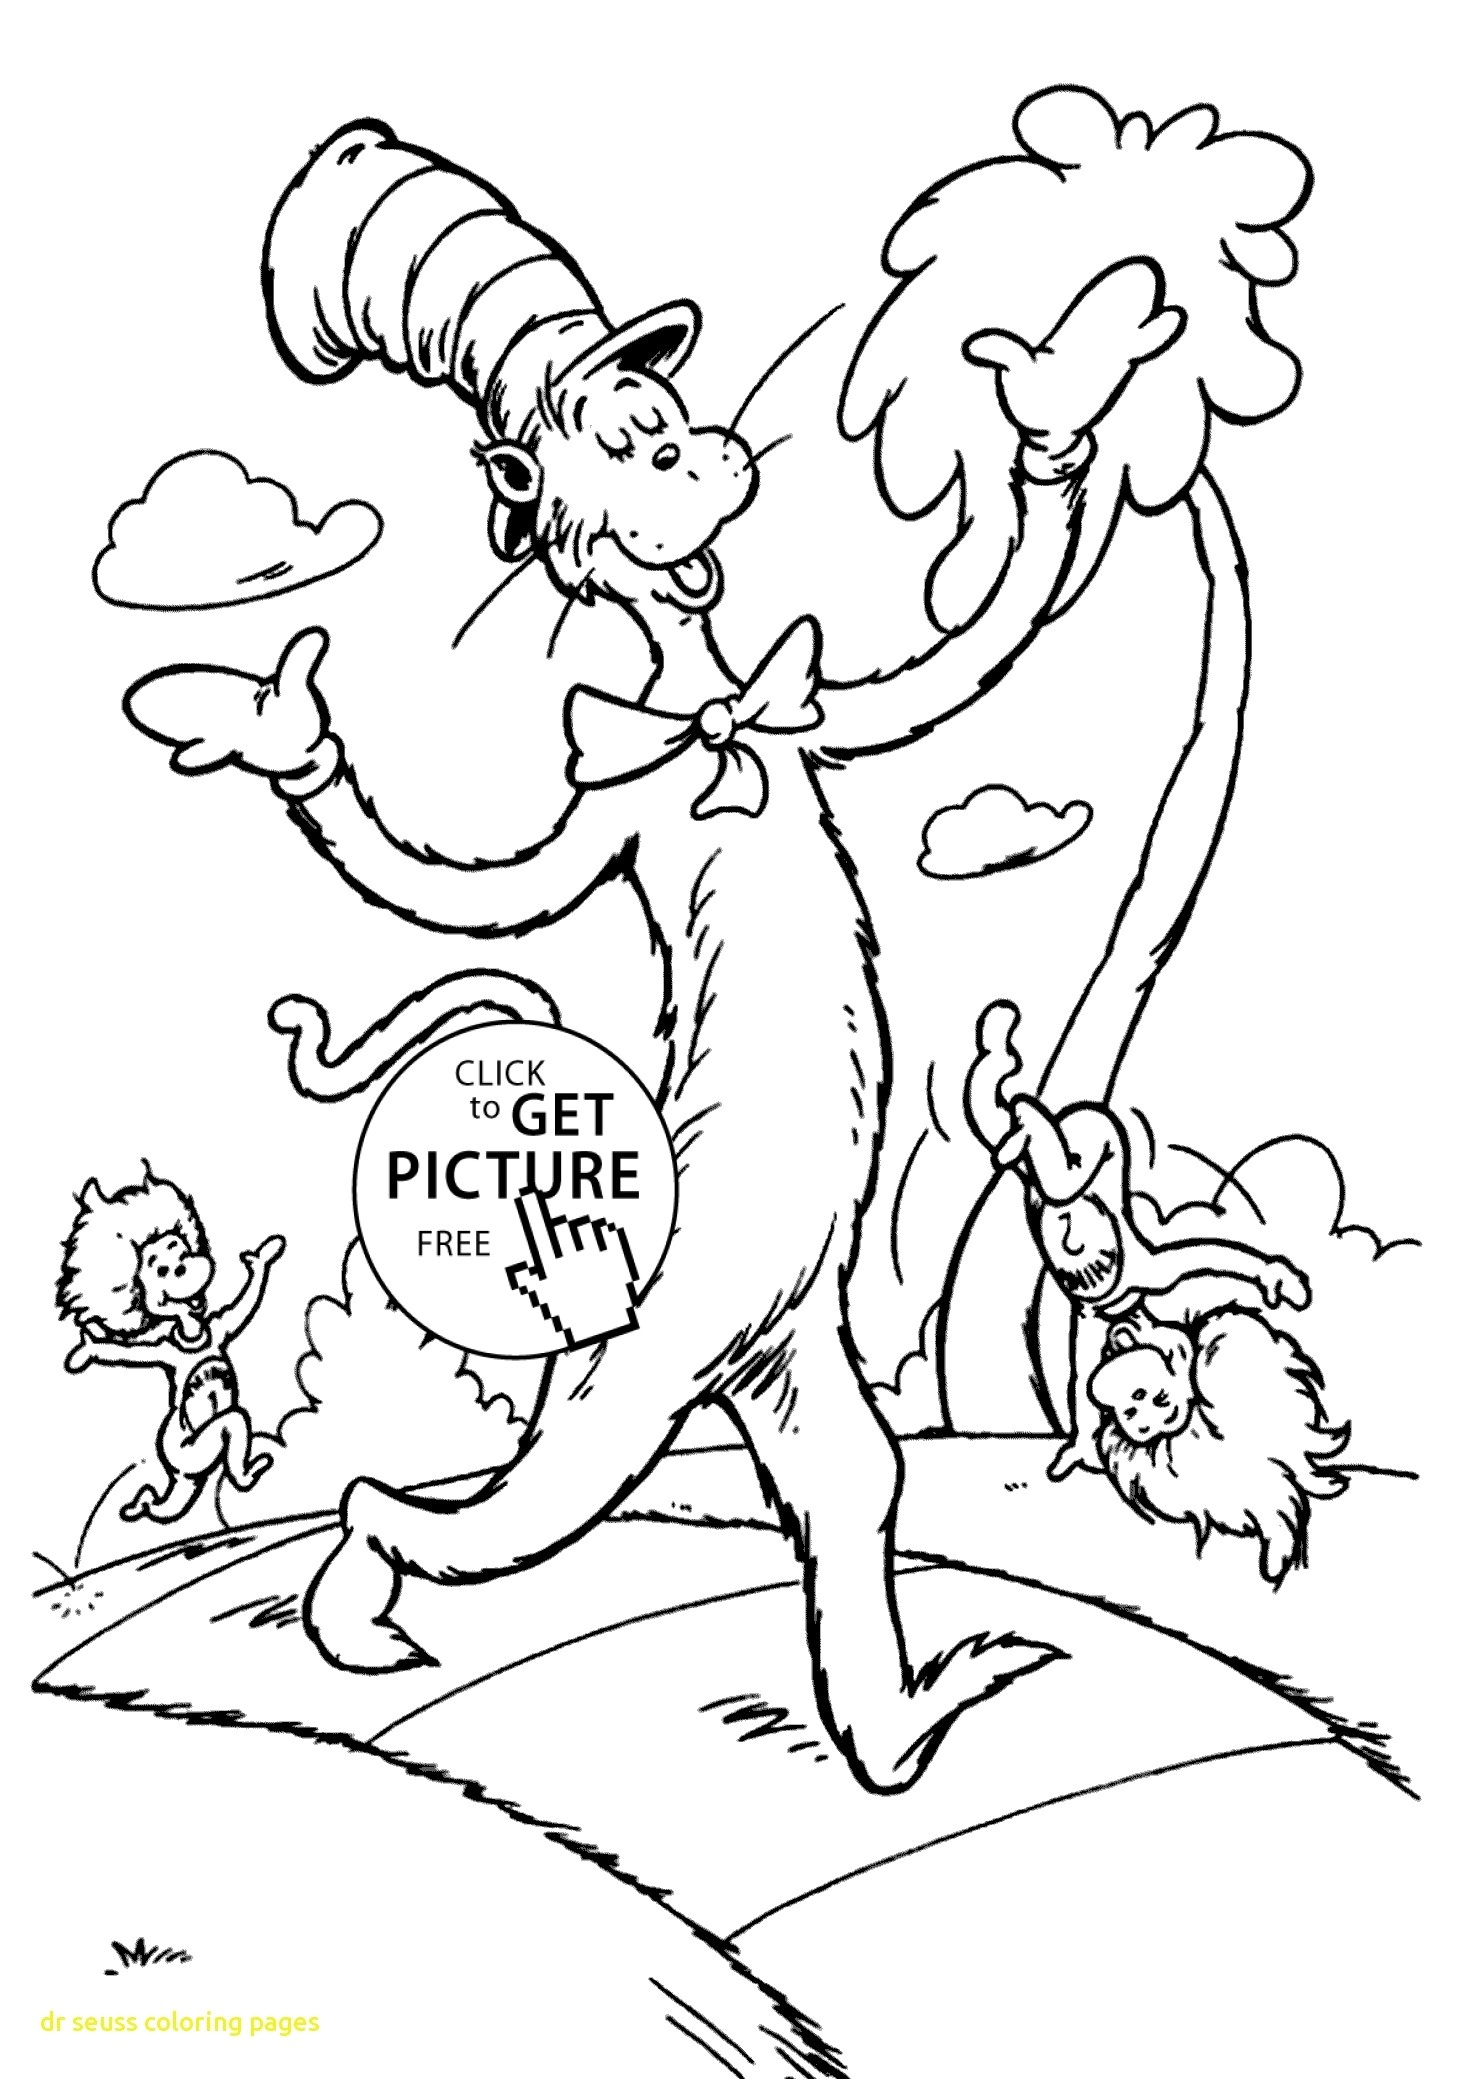 Free Dr Seuss Coloring Pages Dr Seuss Coloring Pages Printable Free For Kids Page Easy Cartoon Of